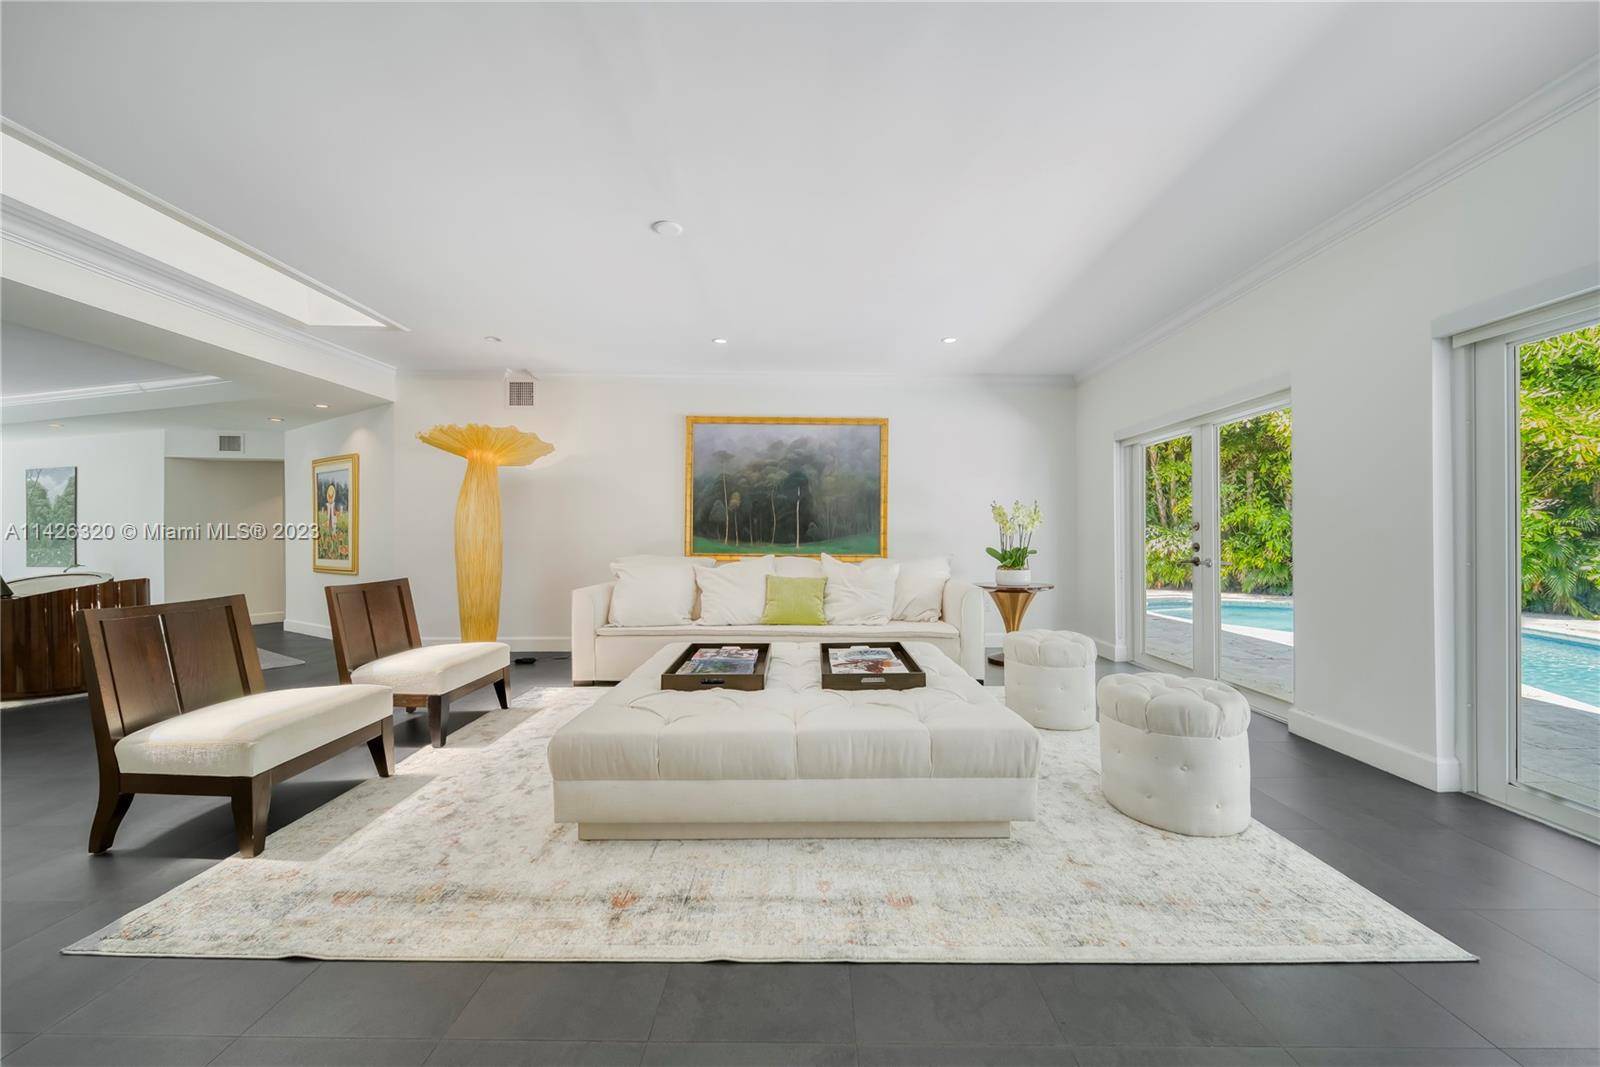 Situated in one of the most prestigious streets in Coral Gables.